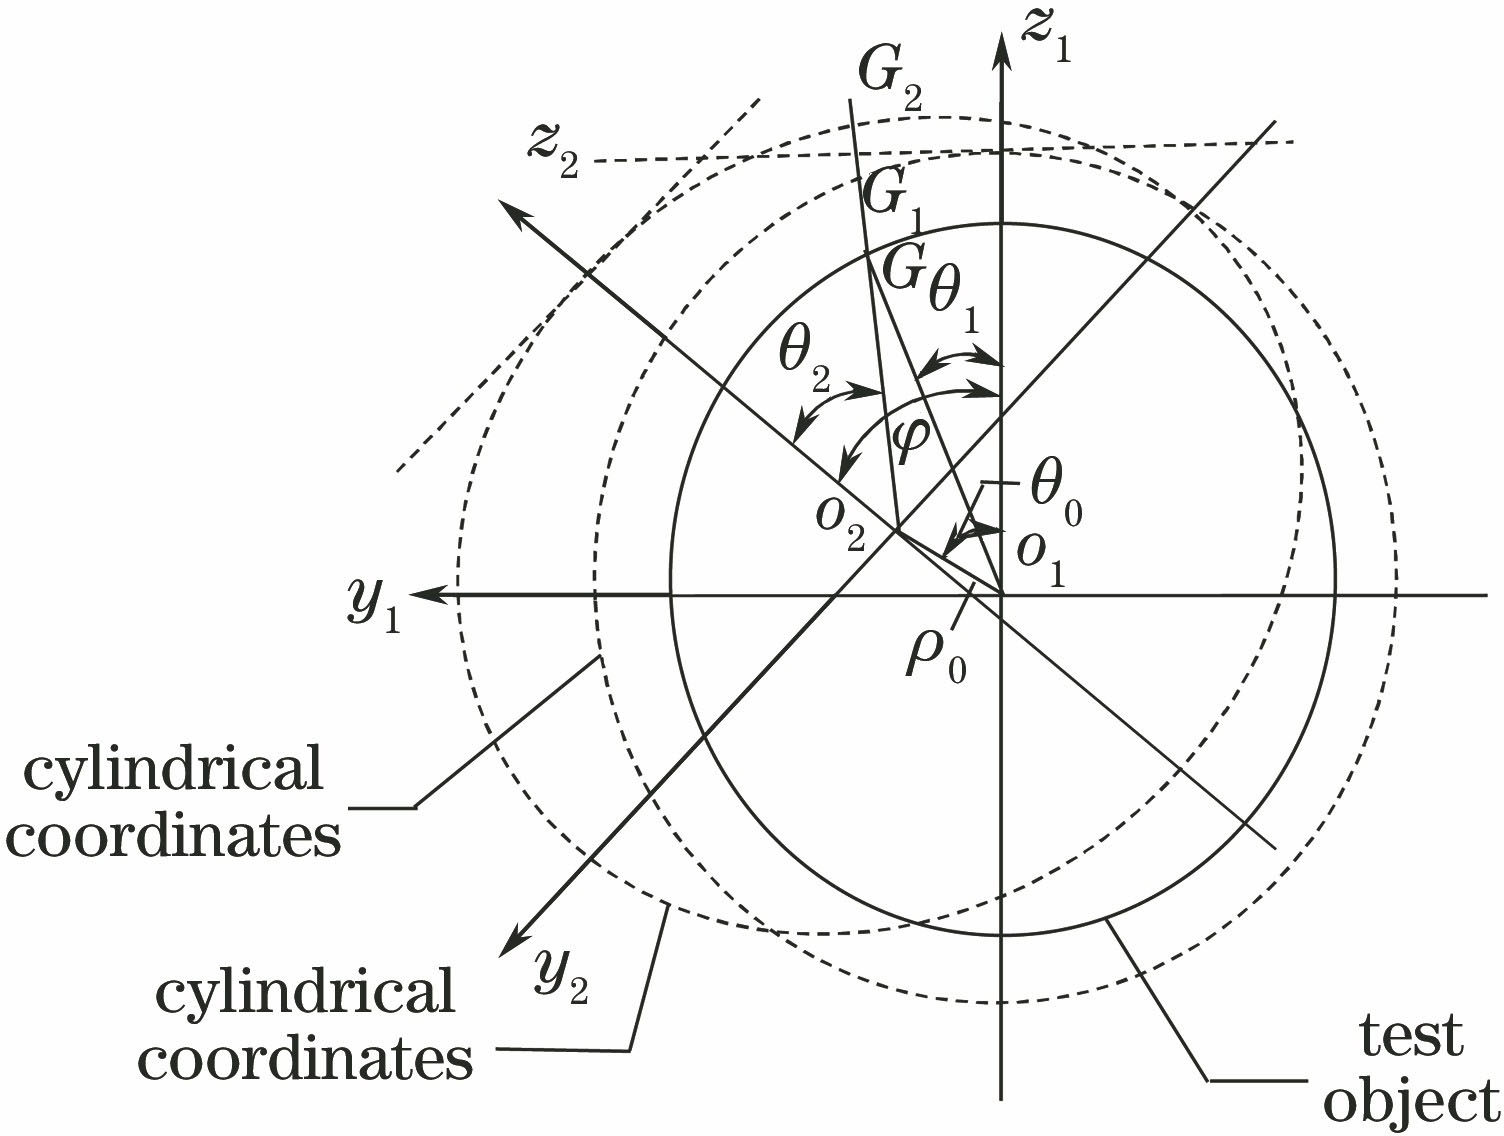 Coordinate transformation relations in cylindrical coordinate systems